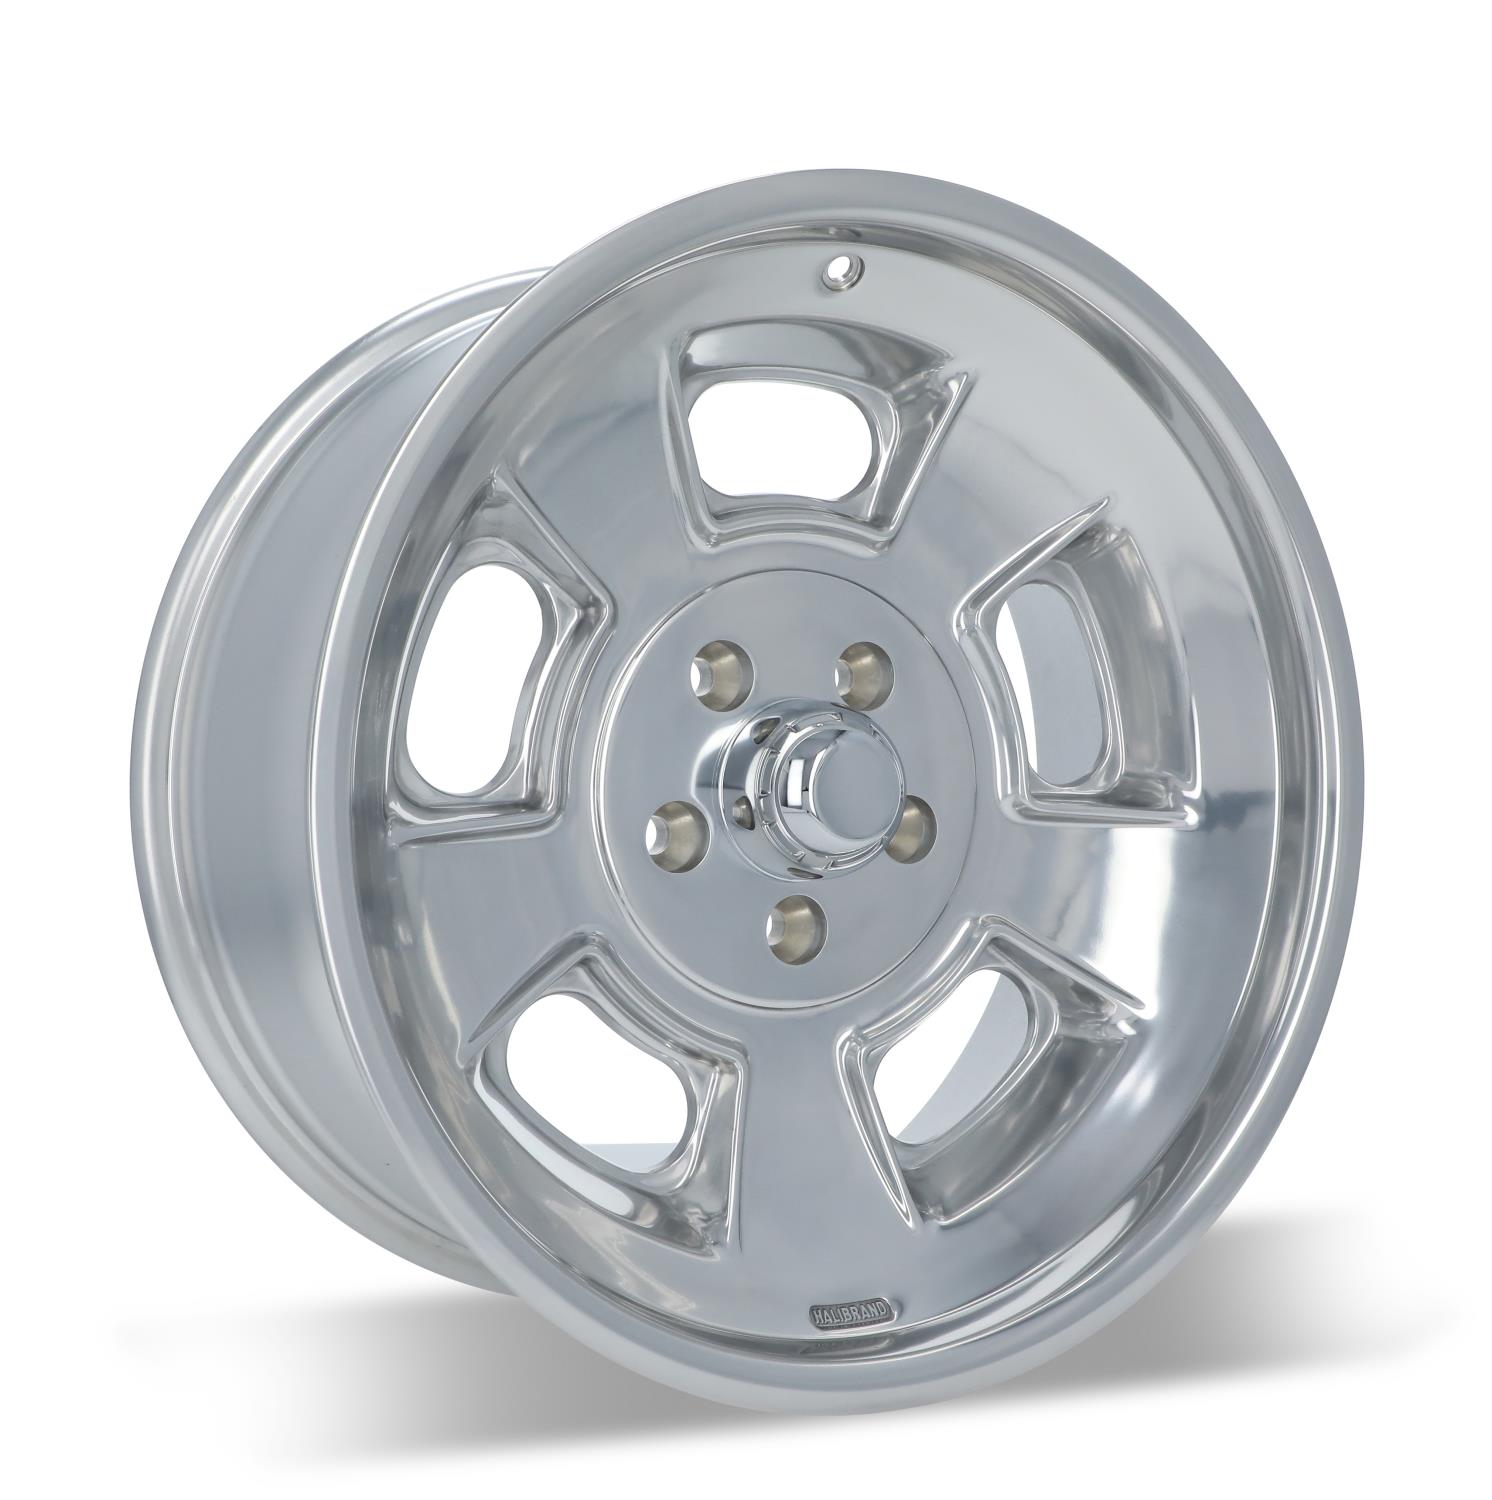 Sprint Front Wheel, Size: 19x8.5", Bolt Pattern: 5x5", Backspace: 4.5" [Polished - Gloss Clearcoat]